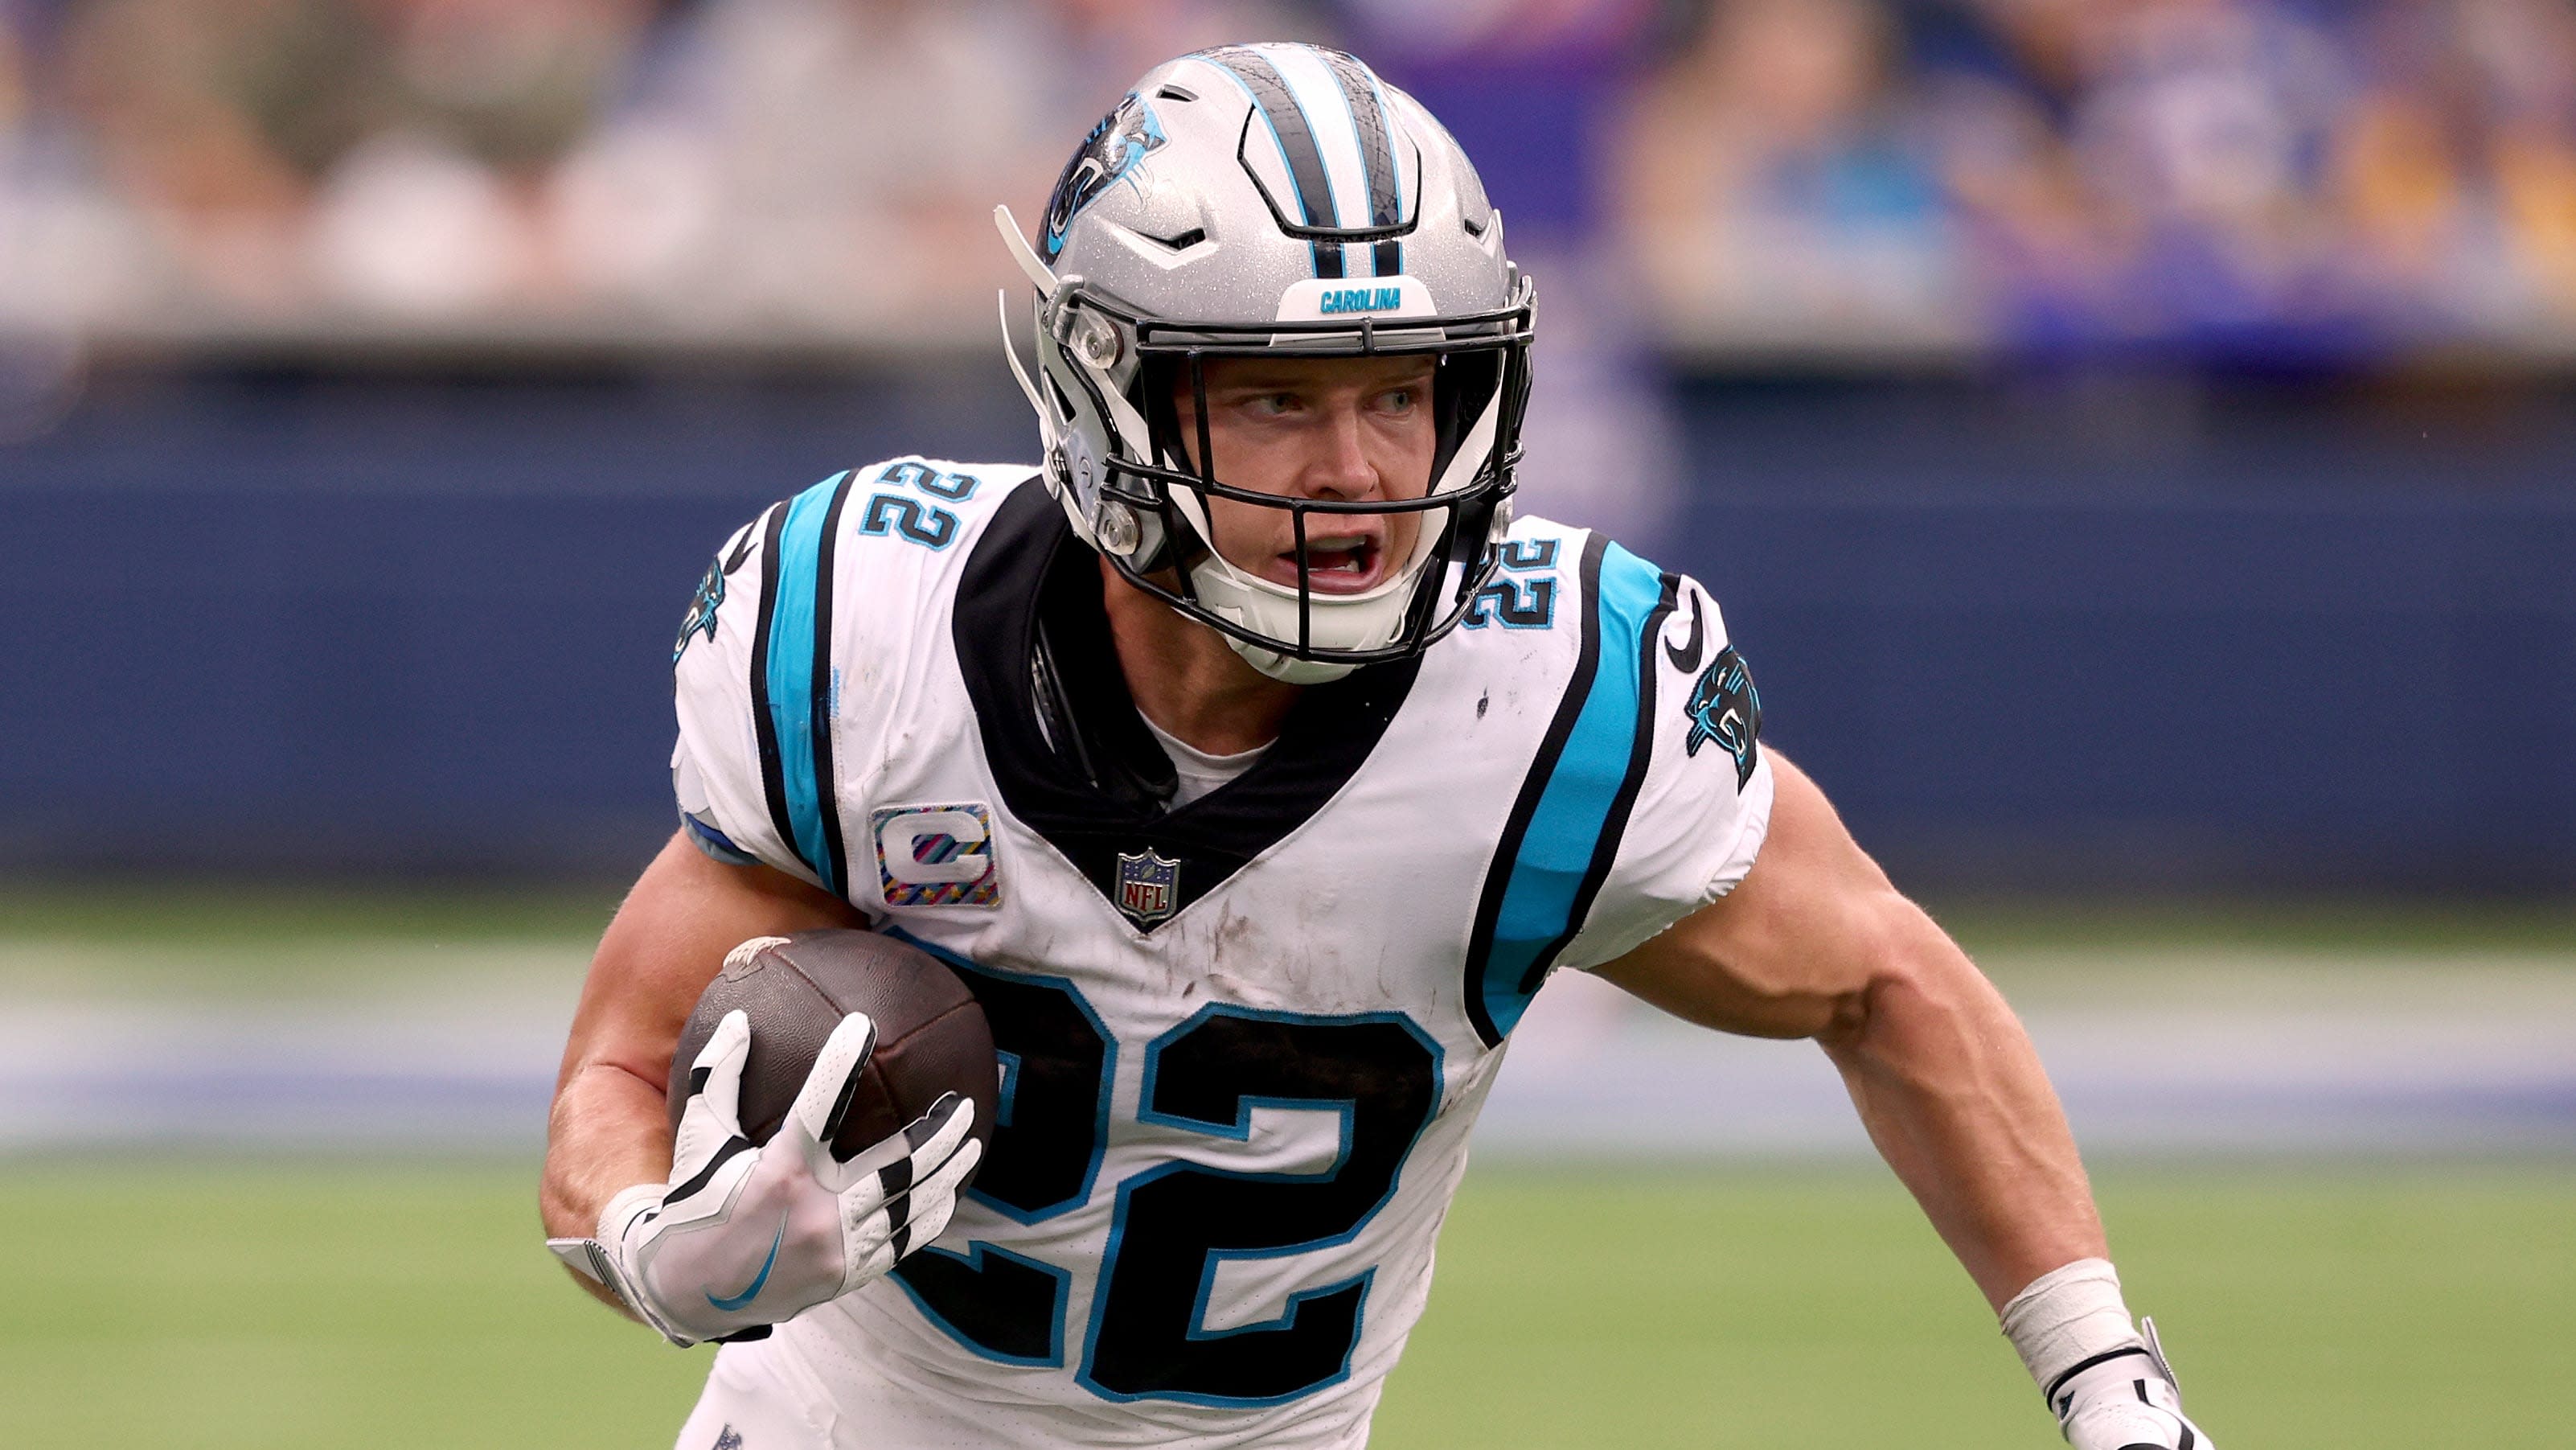 Panthers star RB Christian McCaffrey traded to 49ers for draft picks